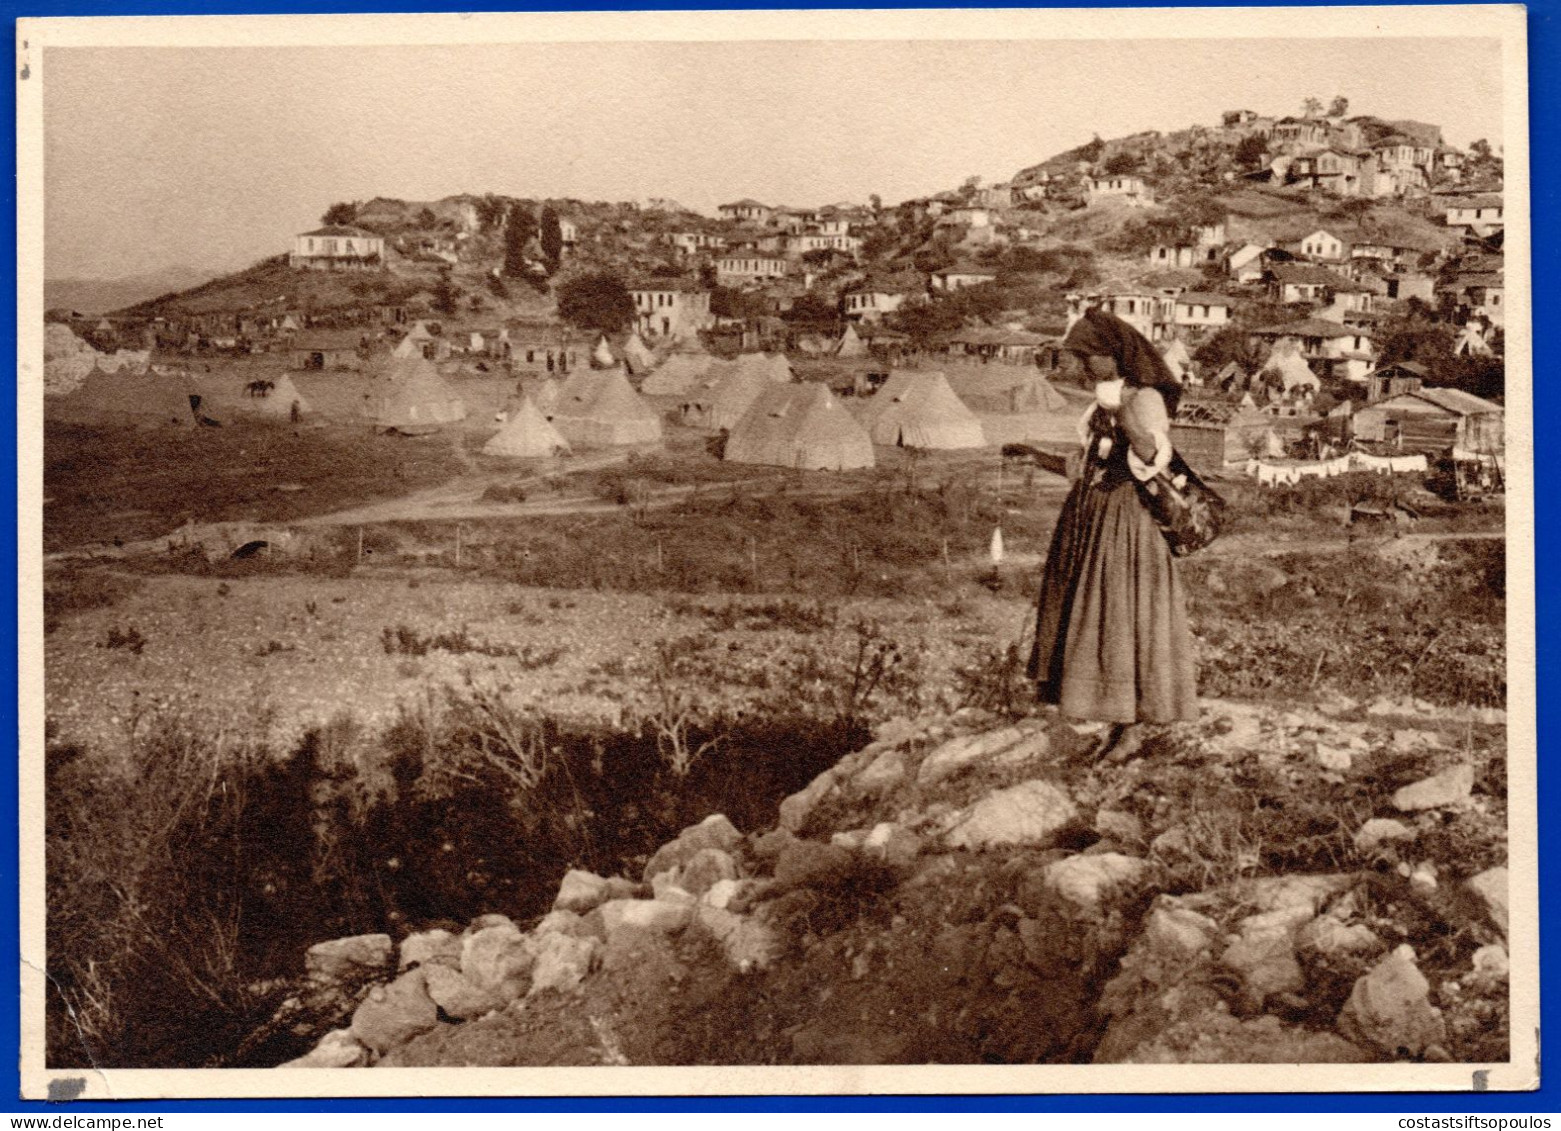 3025.GREECE. UNIDENTIFIED PLACE/VILLAGE POSSIBLY IN MACEDONIA, PHOTO 17.5 X 12.5 Cm.LIGHT CREASE LOWER LEFT. - Europe